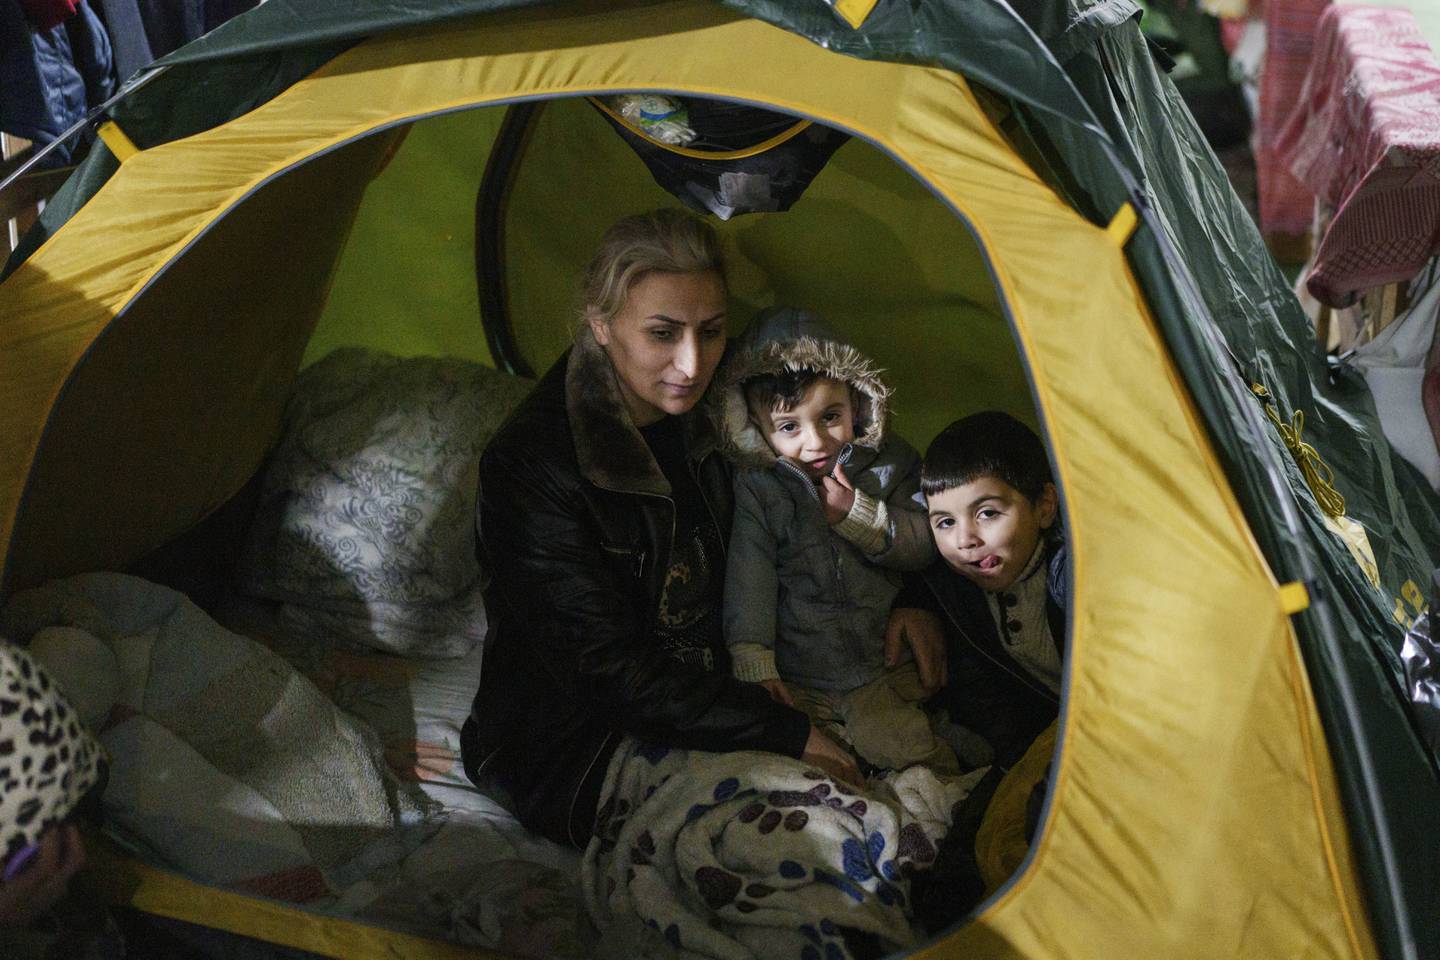 A migrant family on the Belarusian side of the freezing border with Poland. AP 